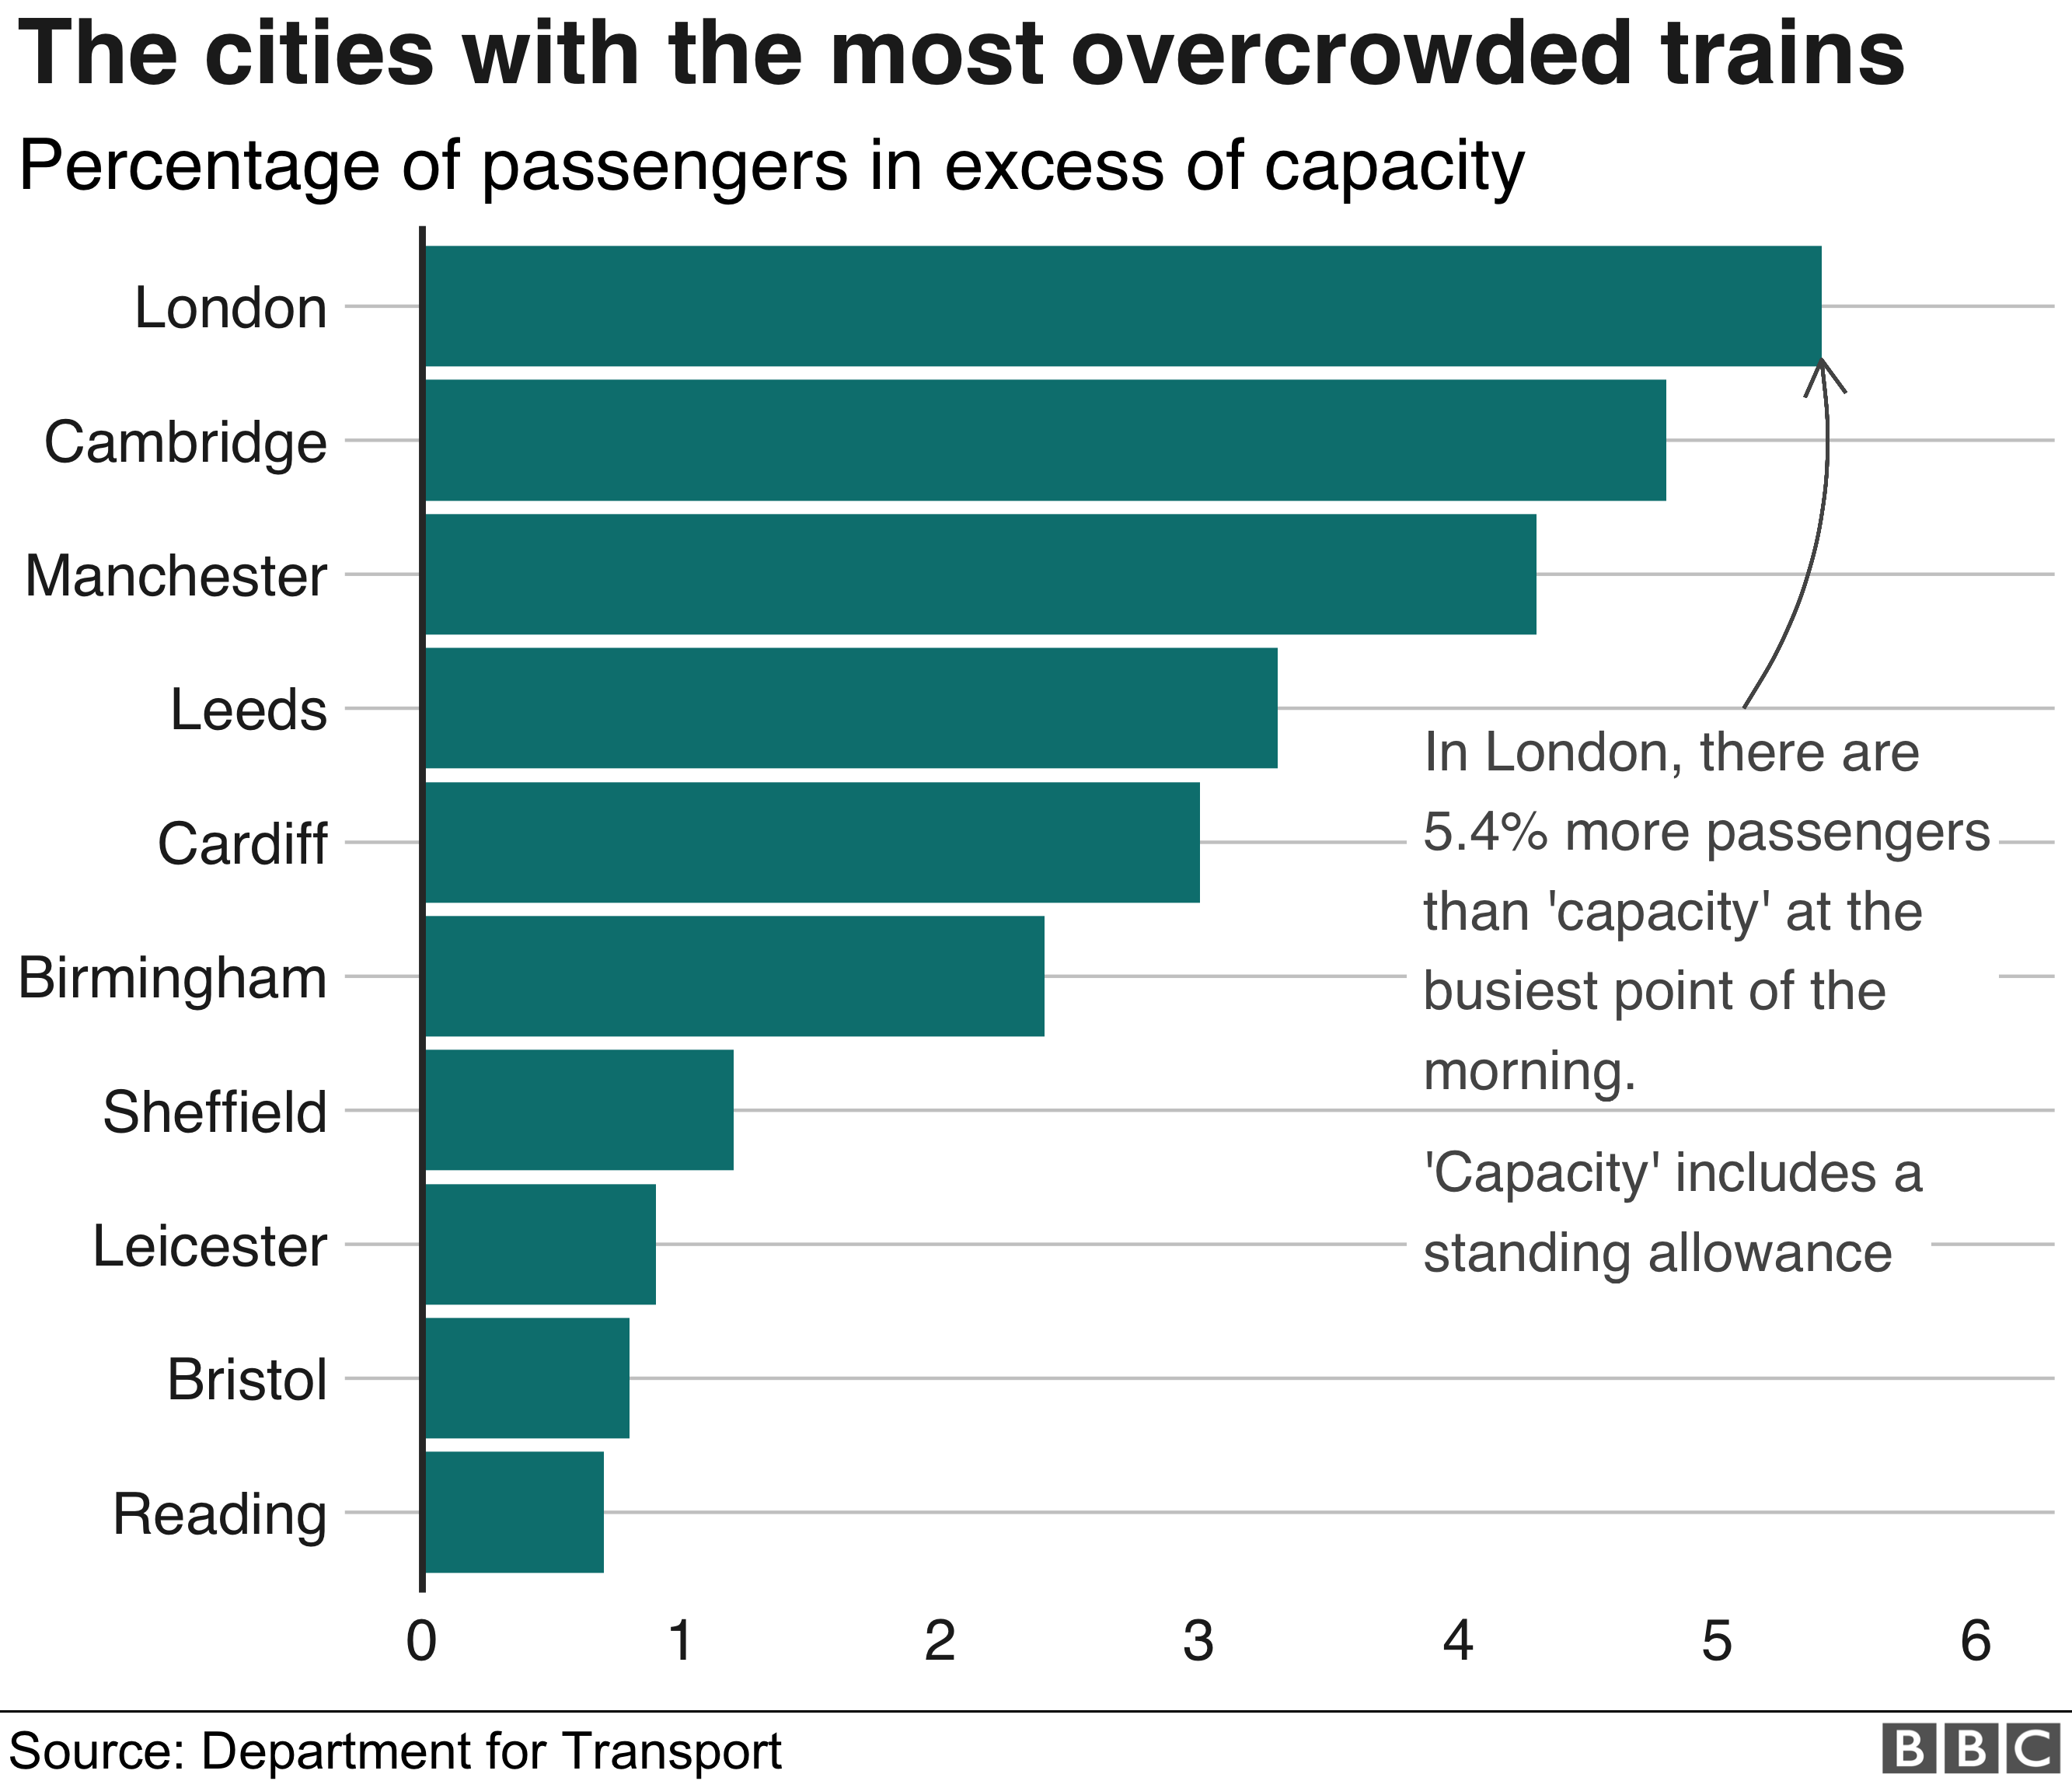 Chart showing ten cities with most overcrowding. London is top - there are 5.4% more passengers than capacity in the morning